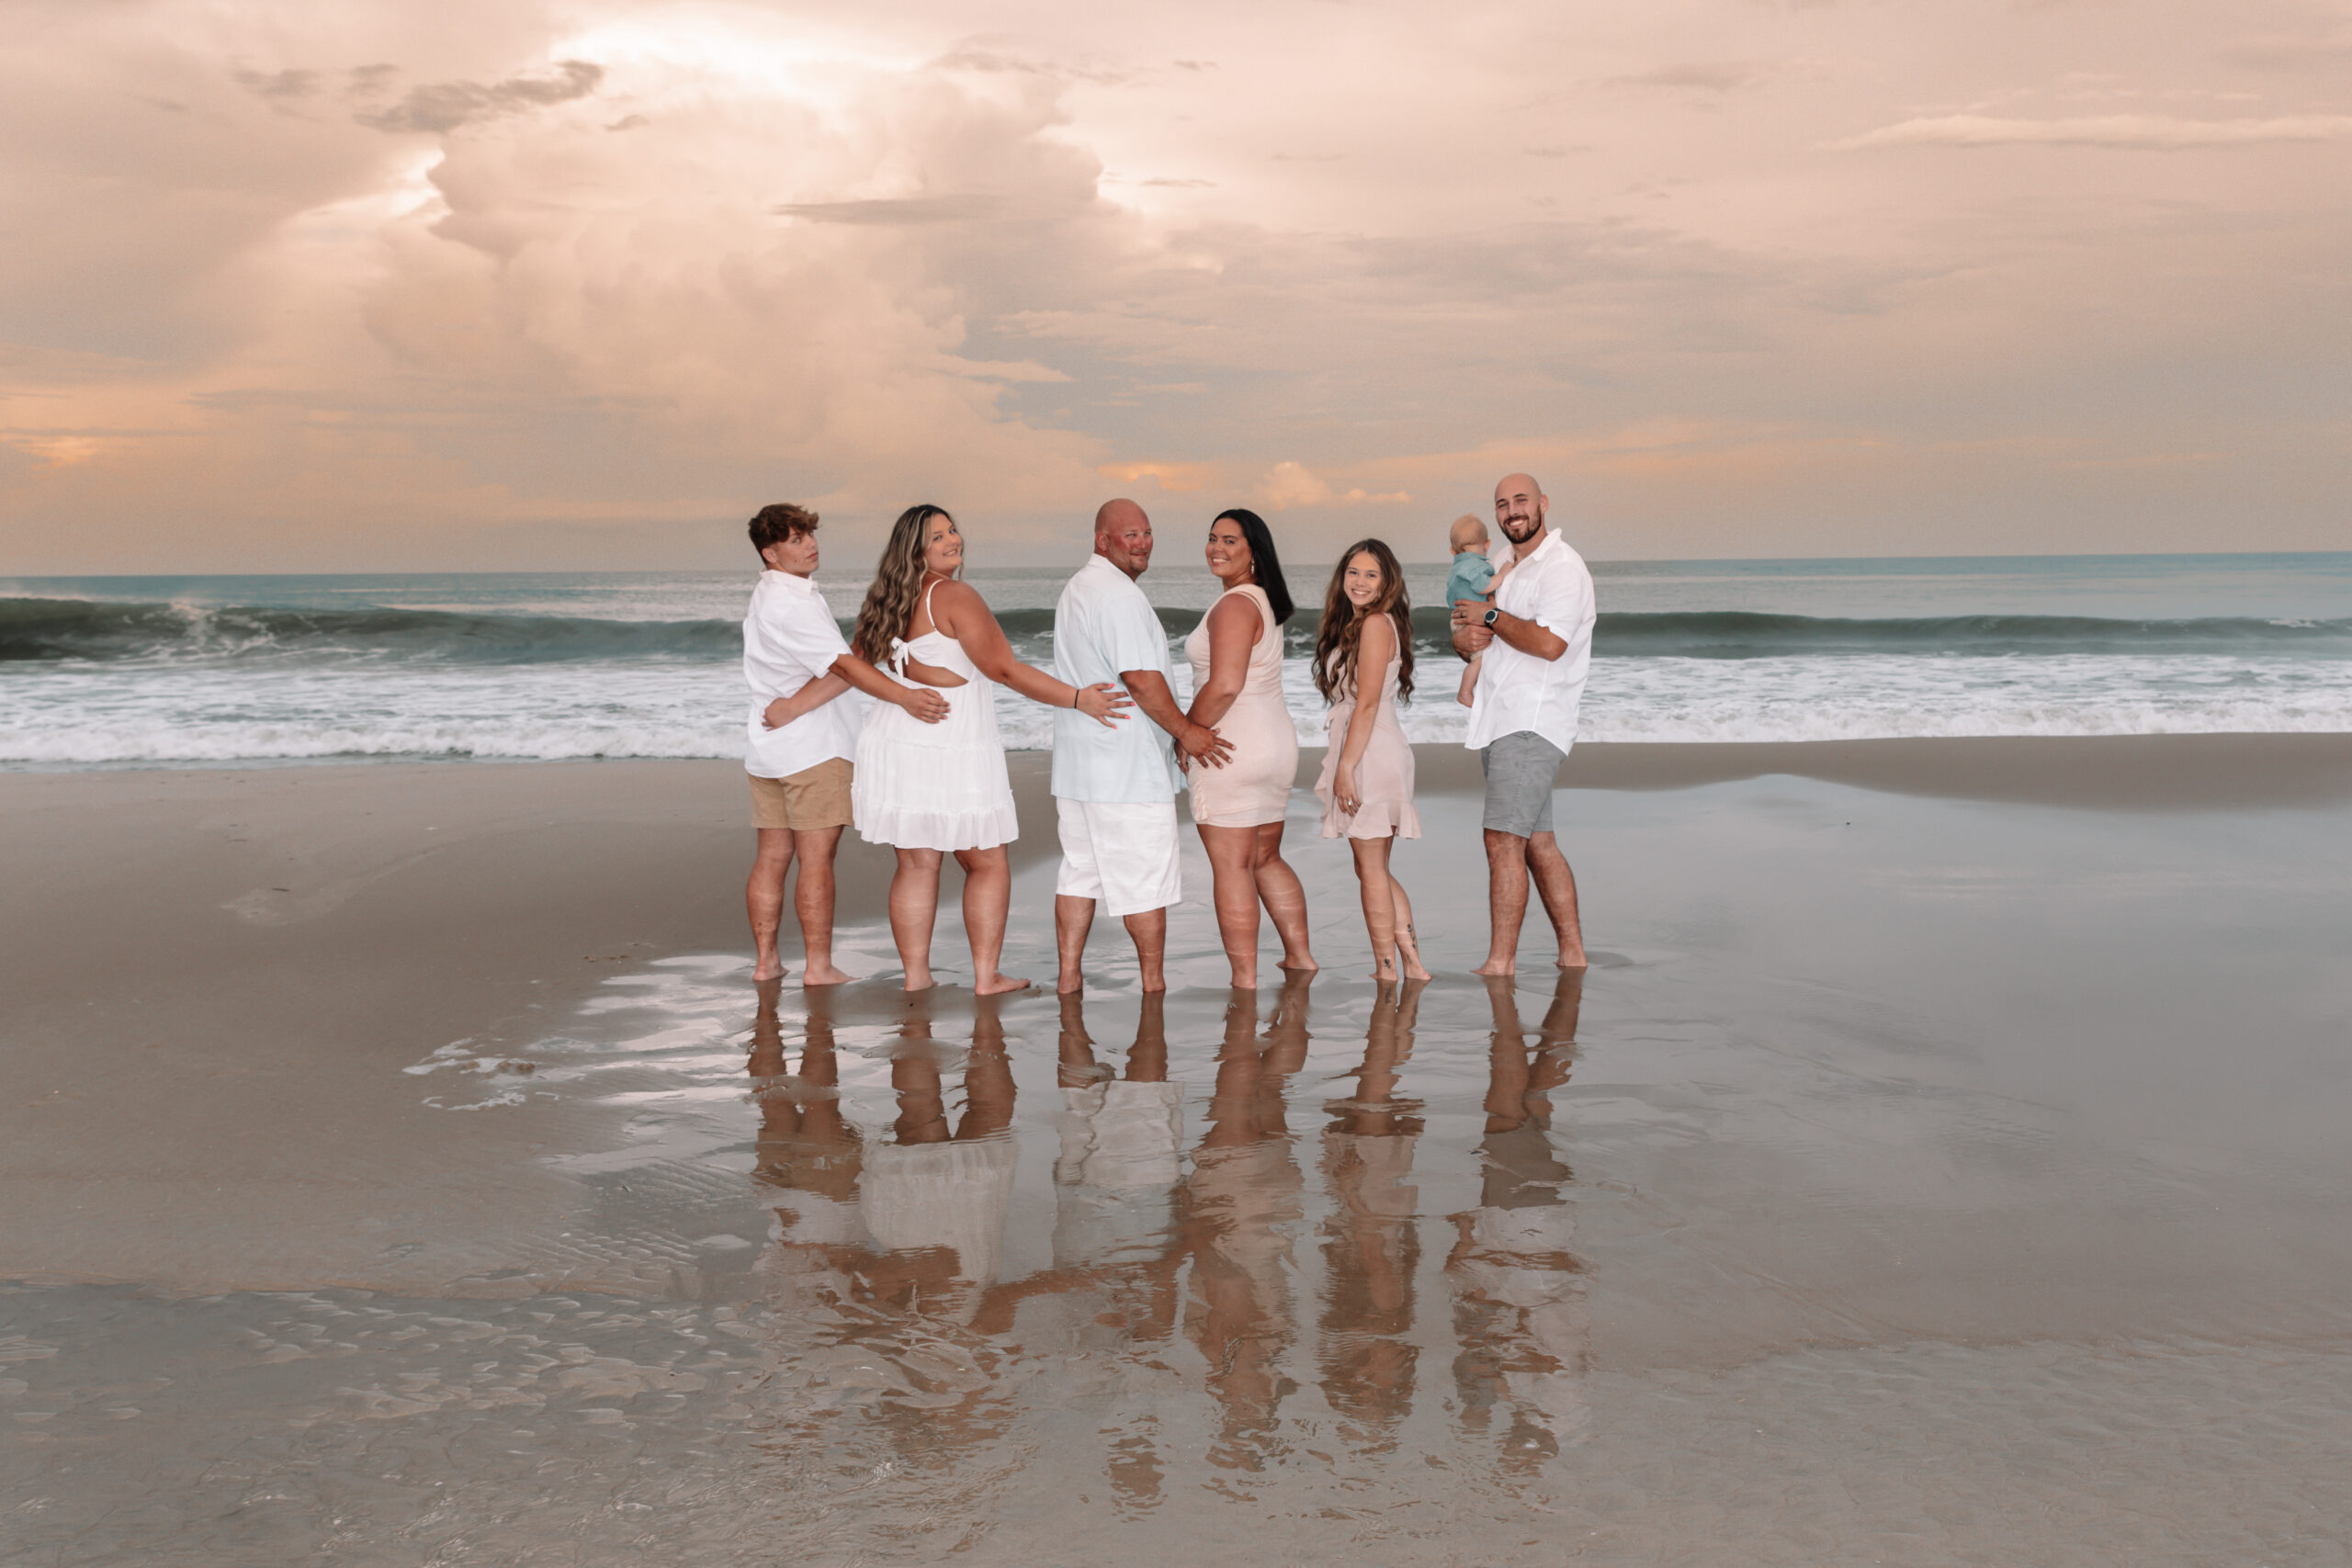 obx family beach photography and weddings mary ks photography obxfamily sunset photo session in corolla nc obx outer banks